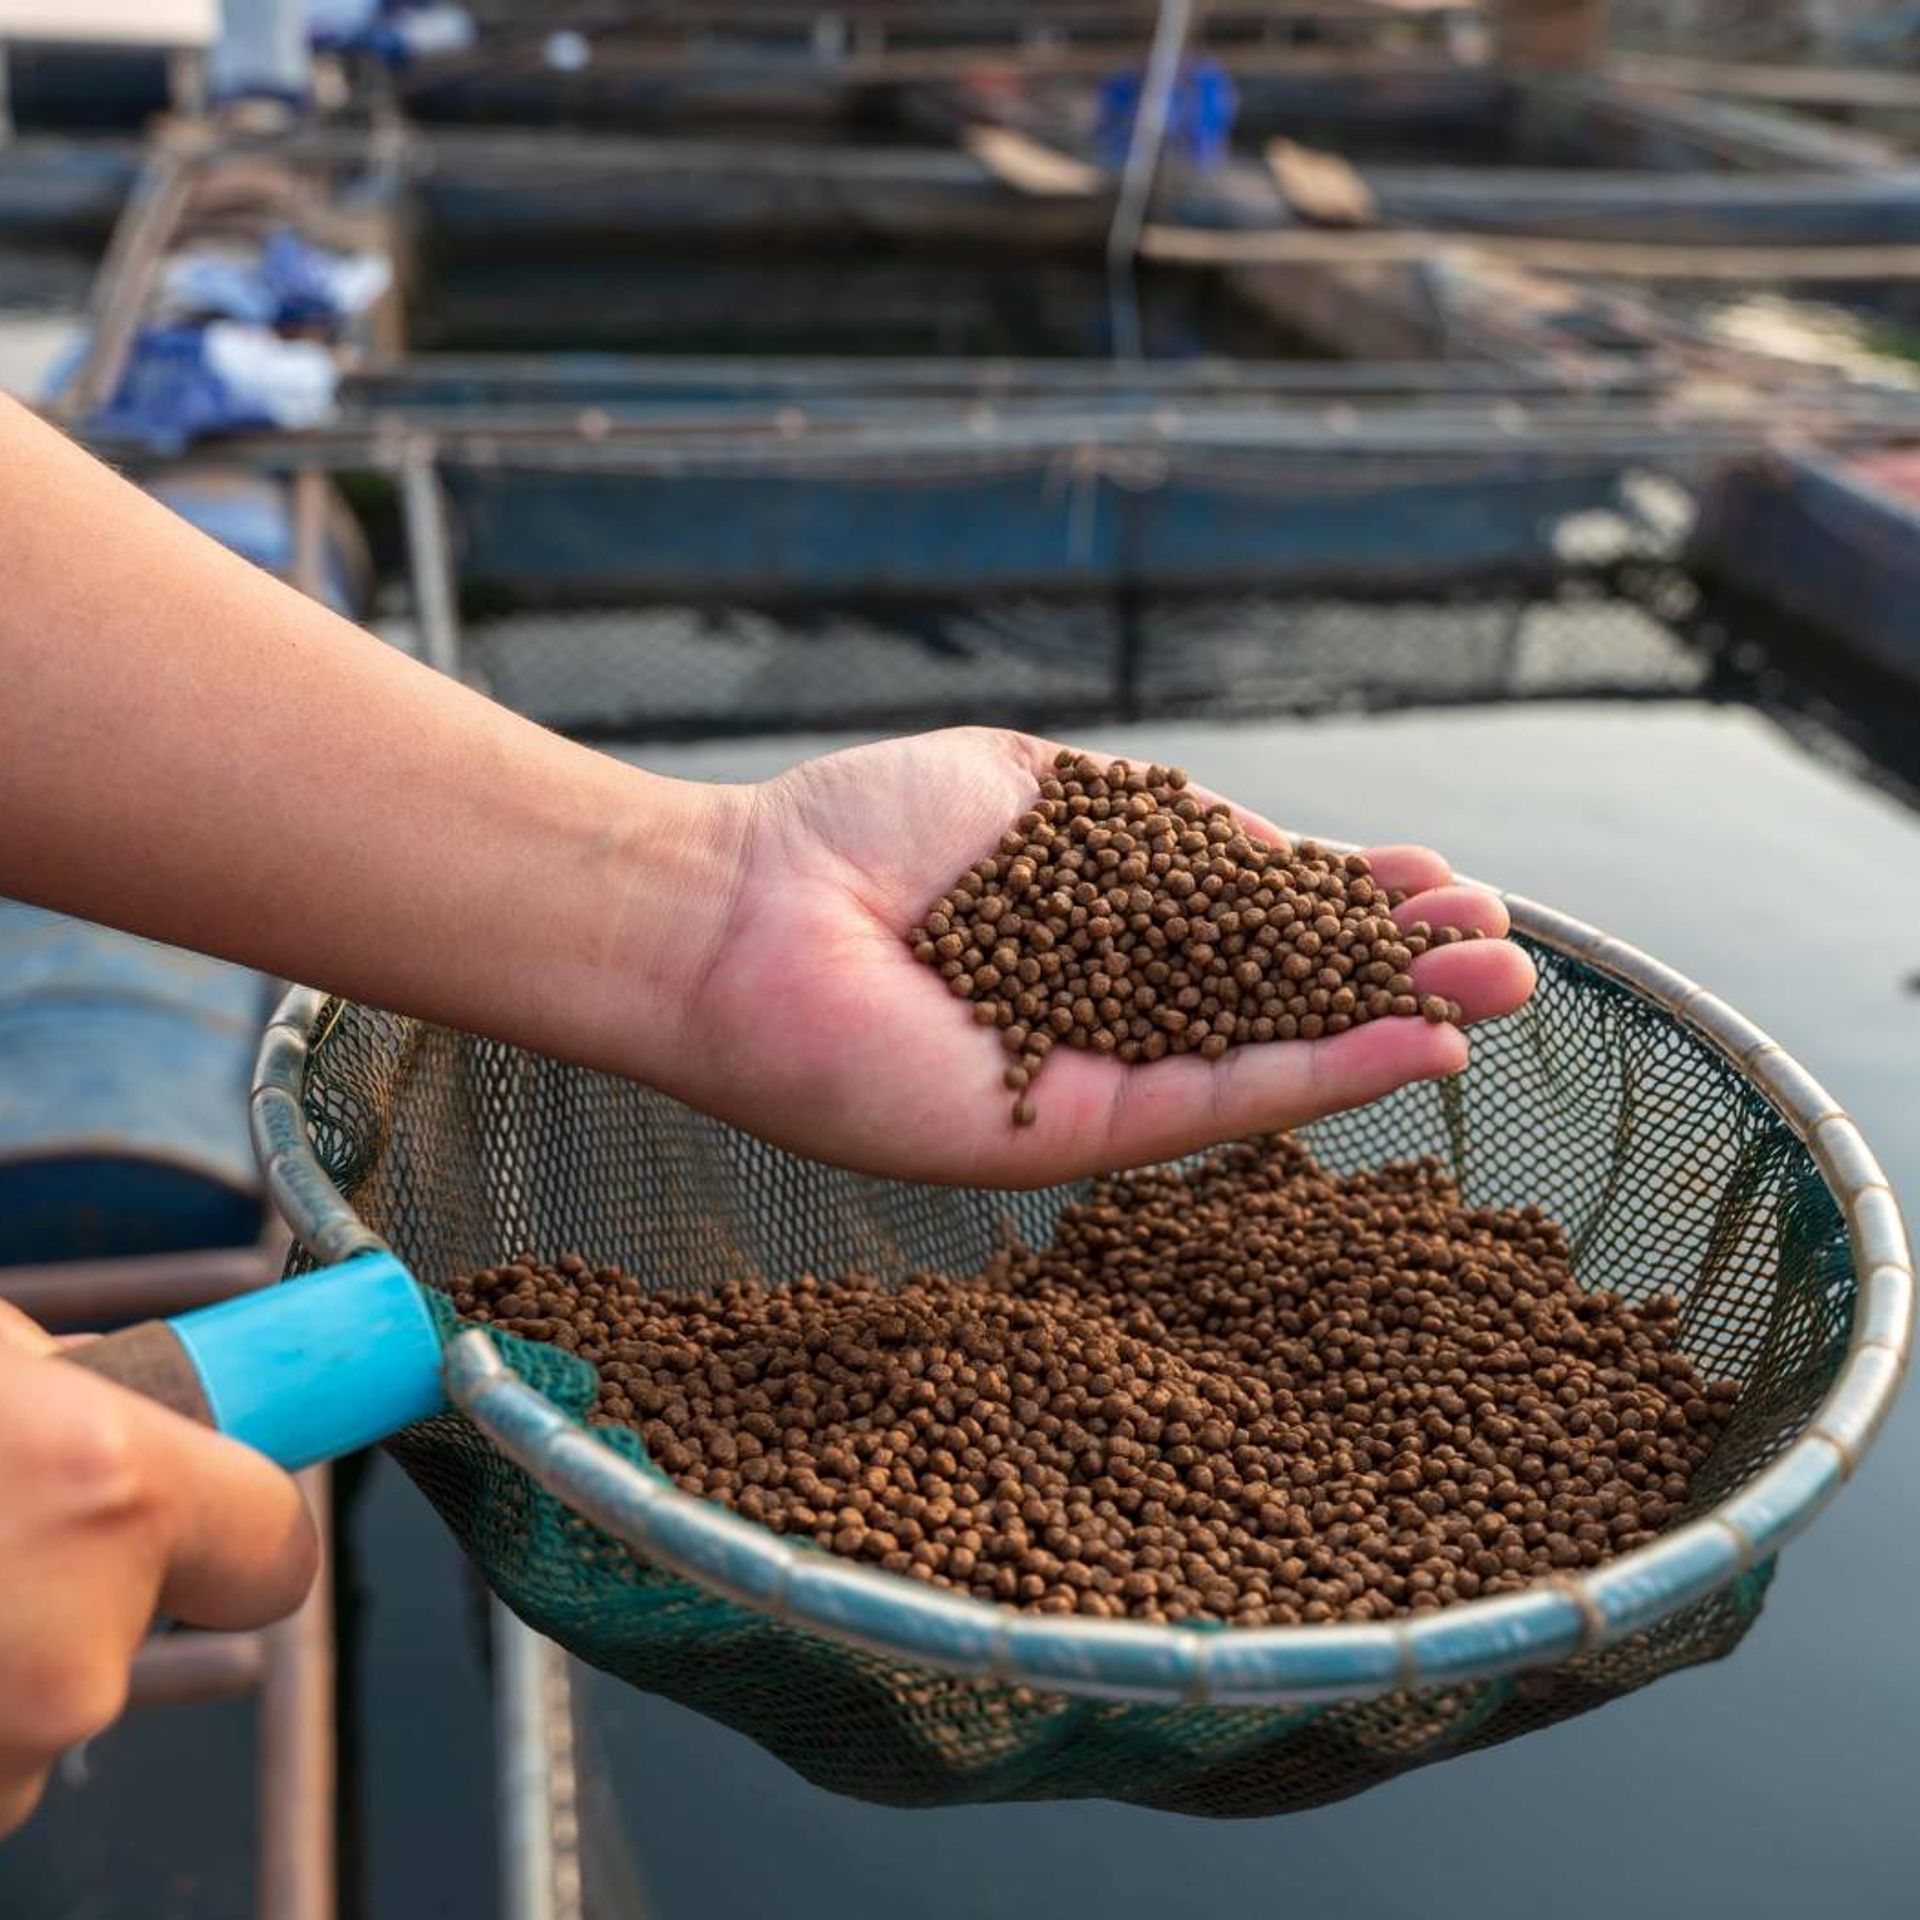 Image of an aquaculture producer holding compound feed for fish